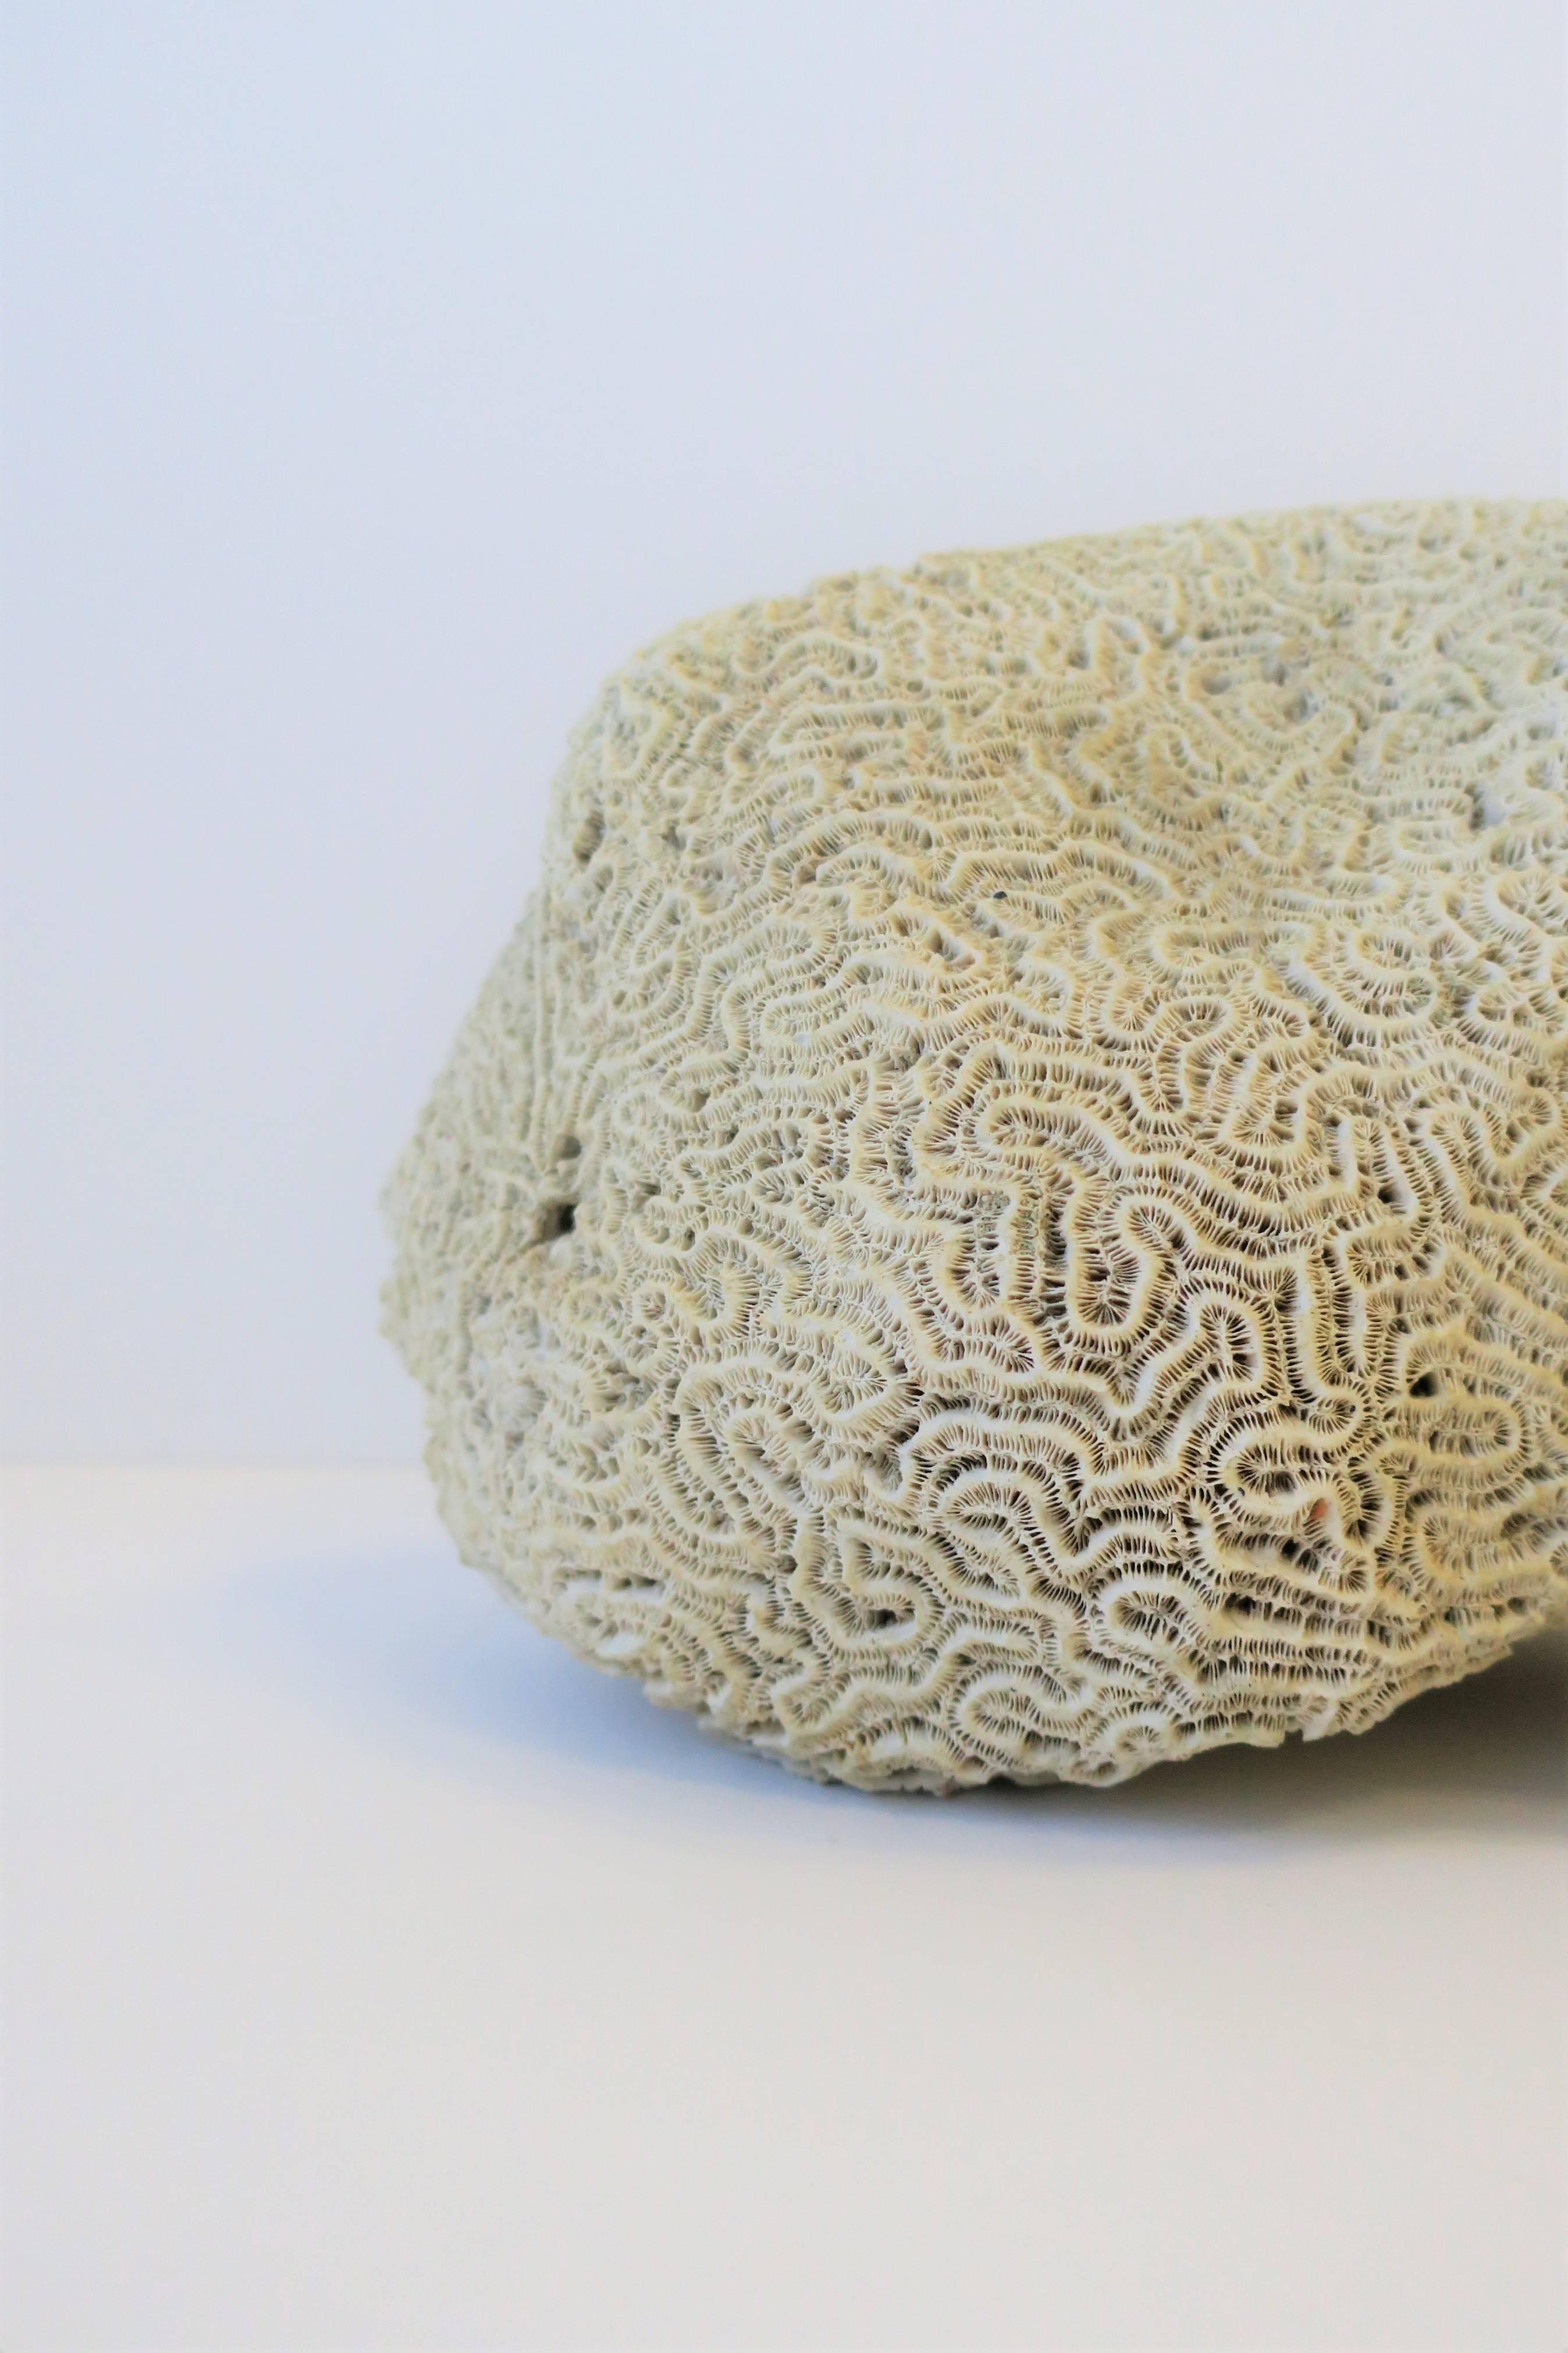 Brain Coral Natural Specimen In Good Condition For Sale In New York, NY